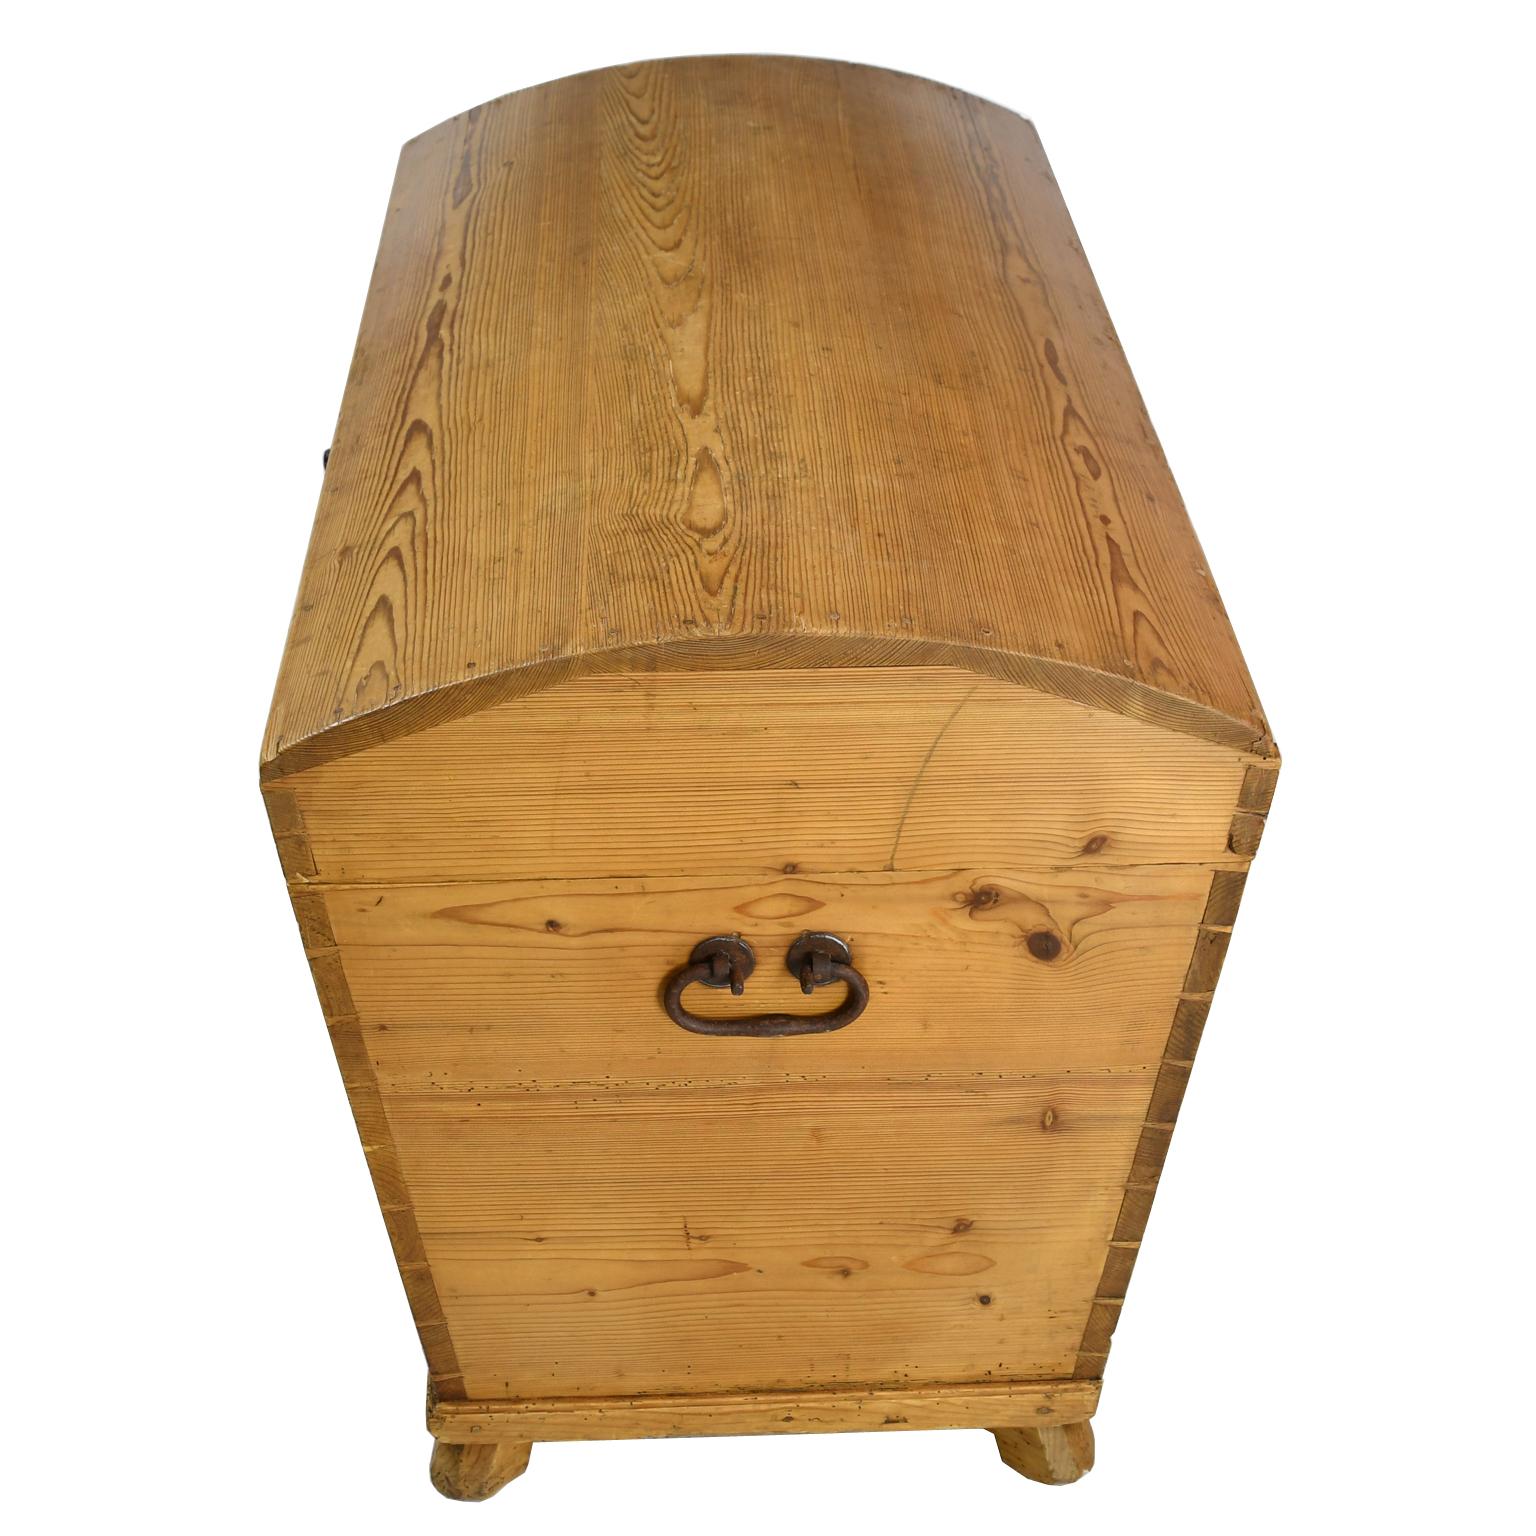 German Antique European Dome-Top Blanket Chest in Pine with Interior Glove Box For Sale